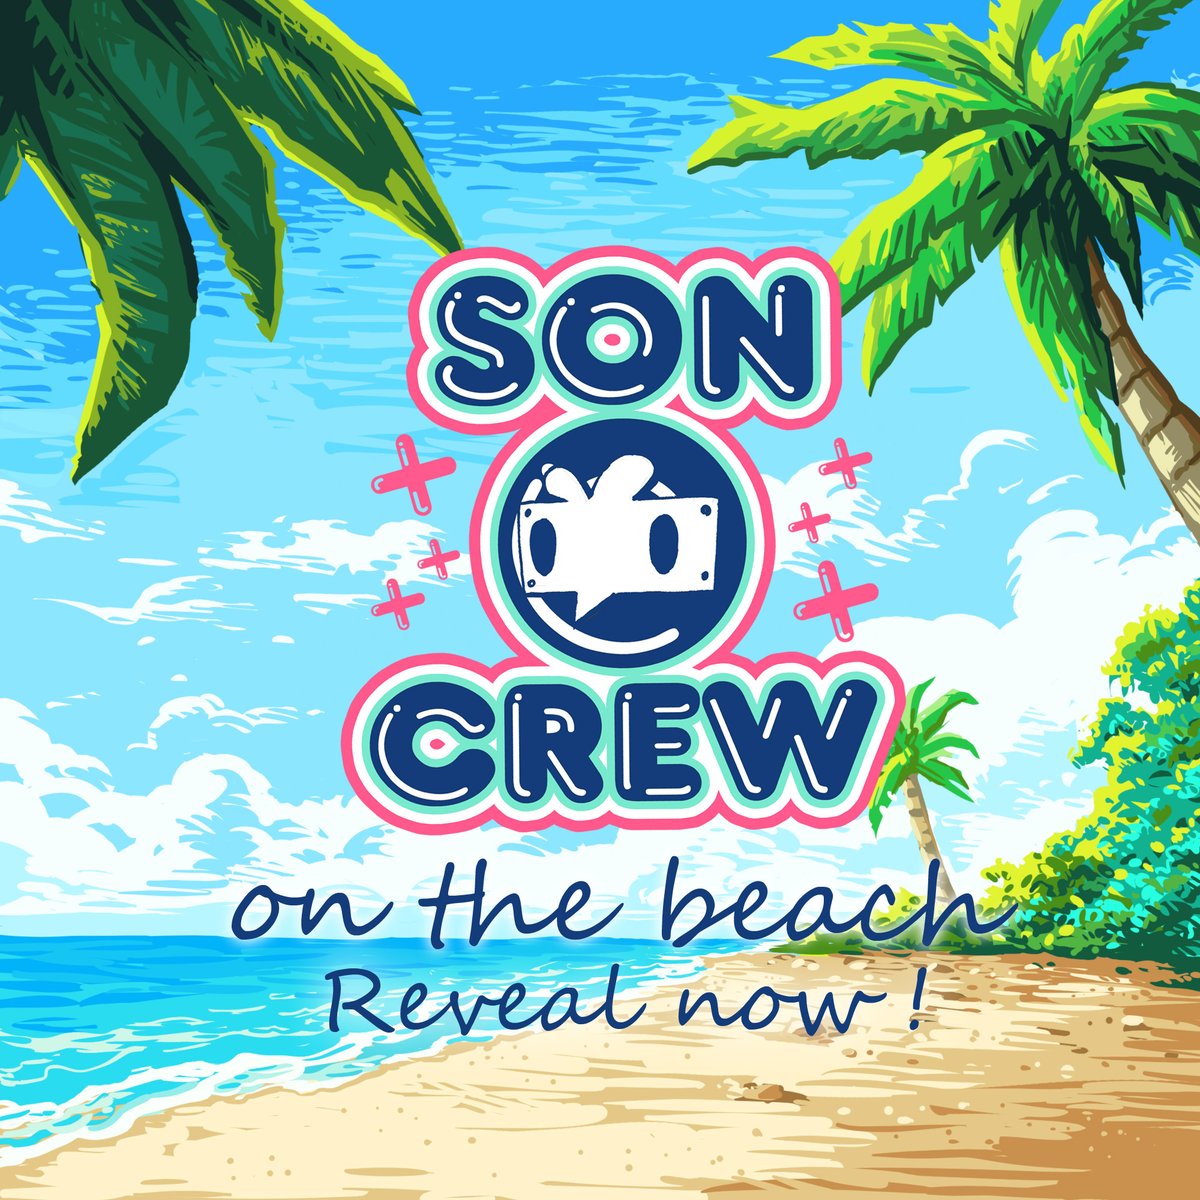 GN Sono Fam
#SonoCrew #onthebeach activity reveal now !! 

Let's come to the sea and check it out !!! opensea.io/collection/son…